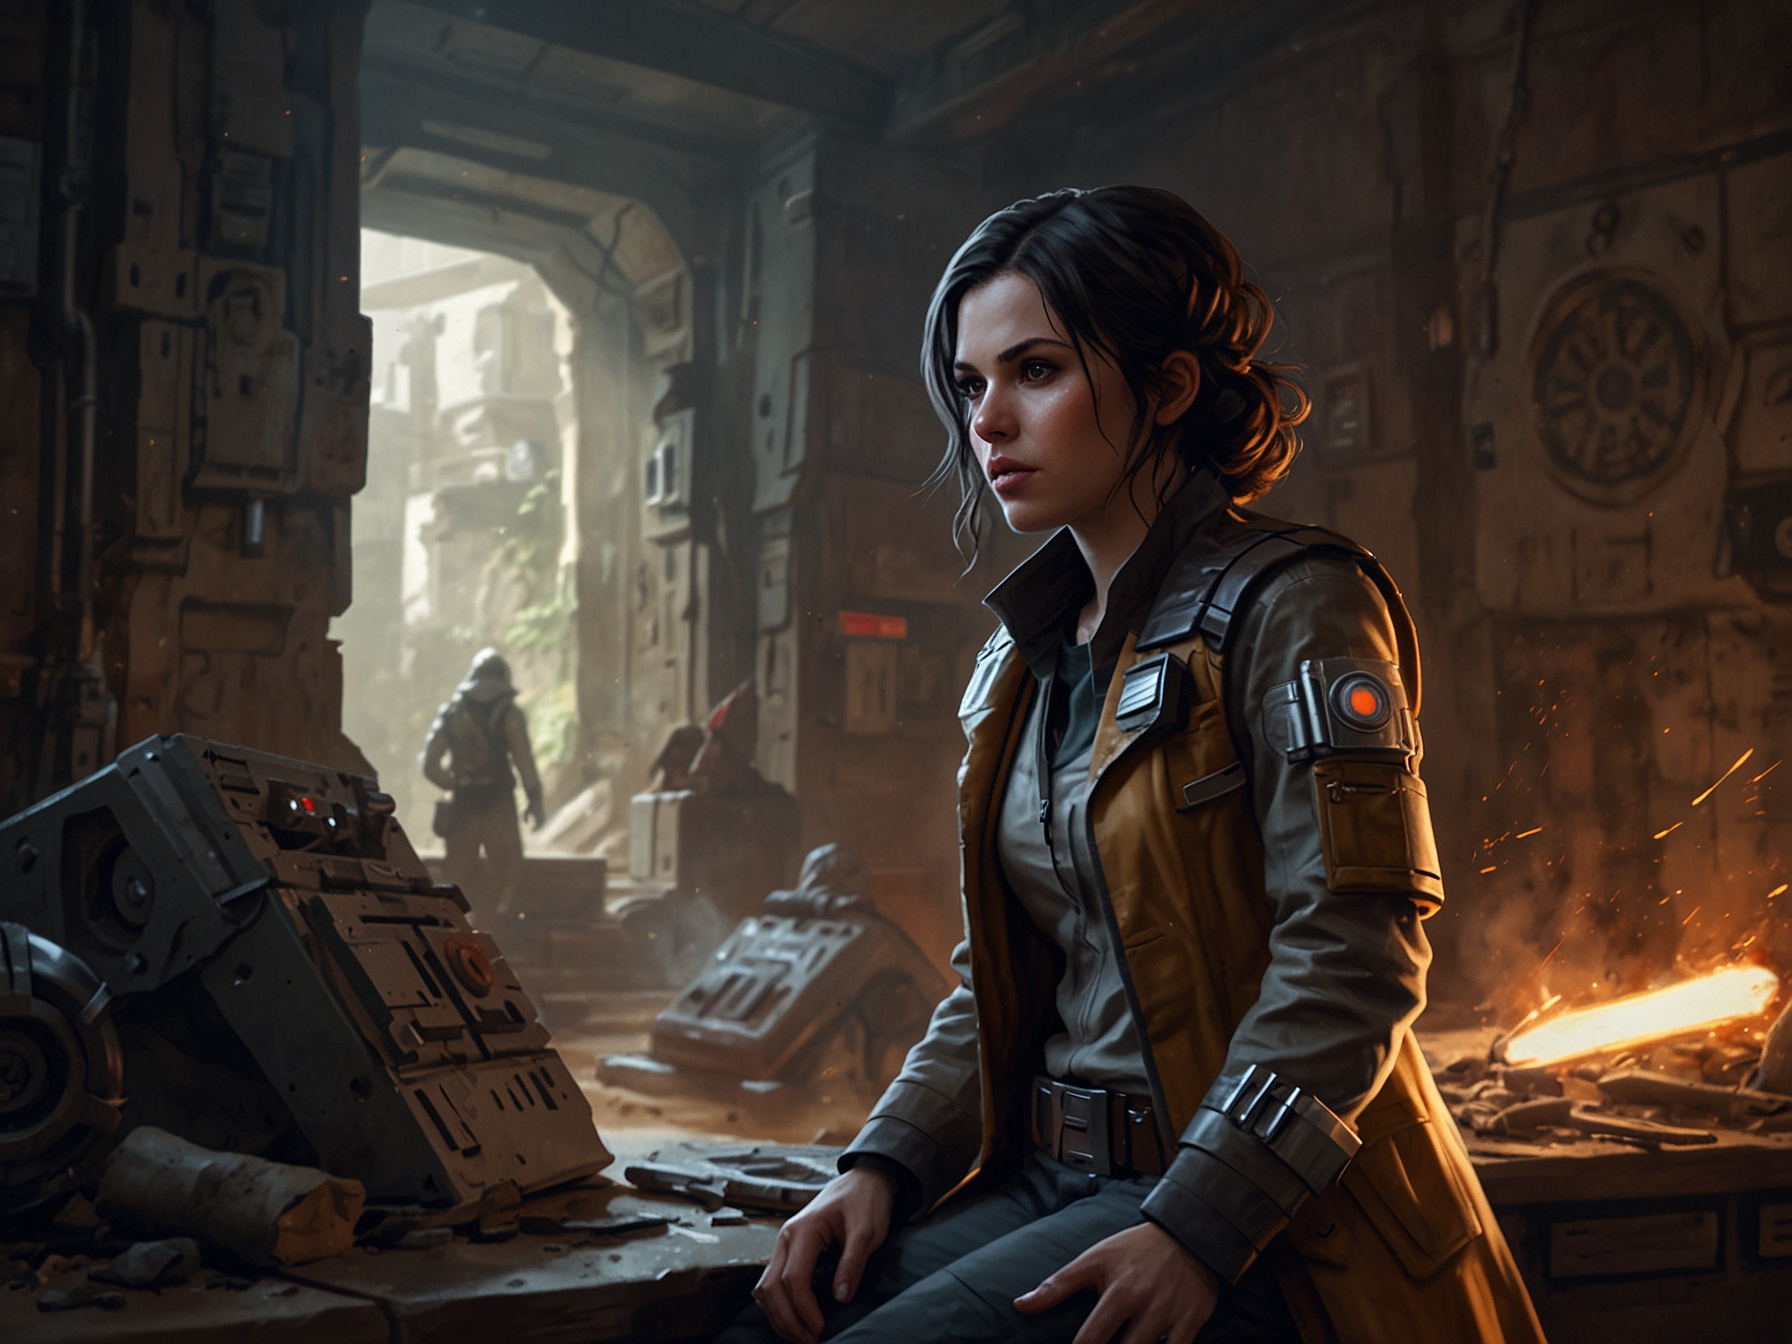 A scene from the Doctor Aphra series featuring the morally ambiguous archaeologist amidst her dangerous quests, highlighting her unique role and complex relationships in the Star Wars universe.